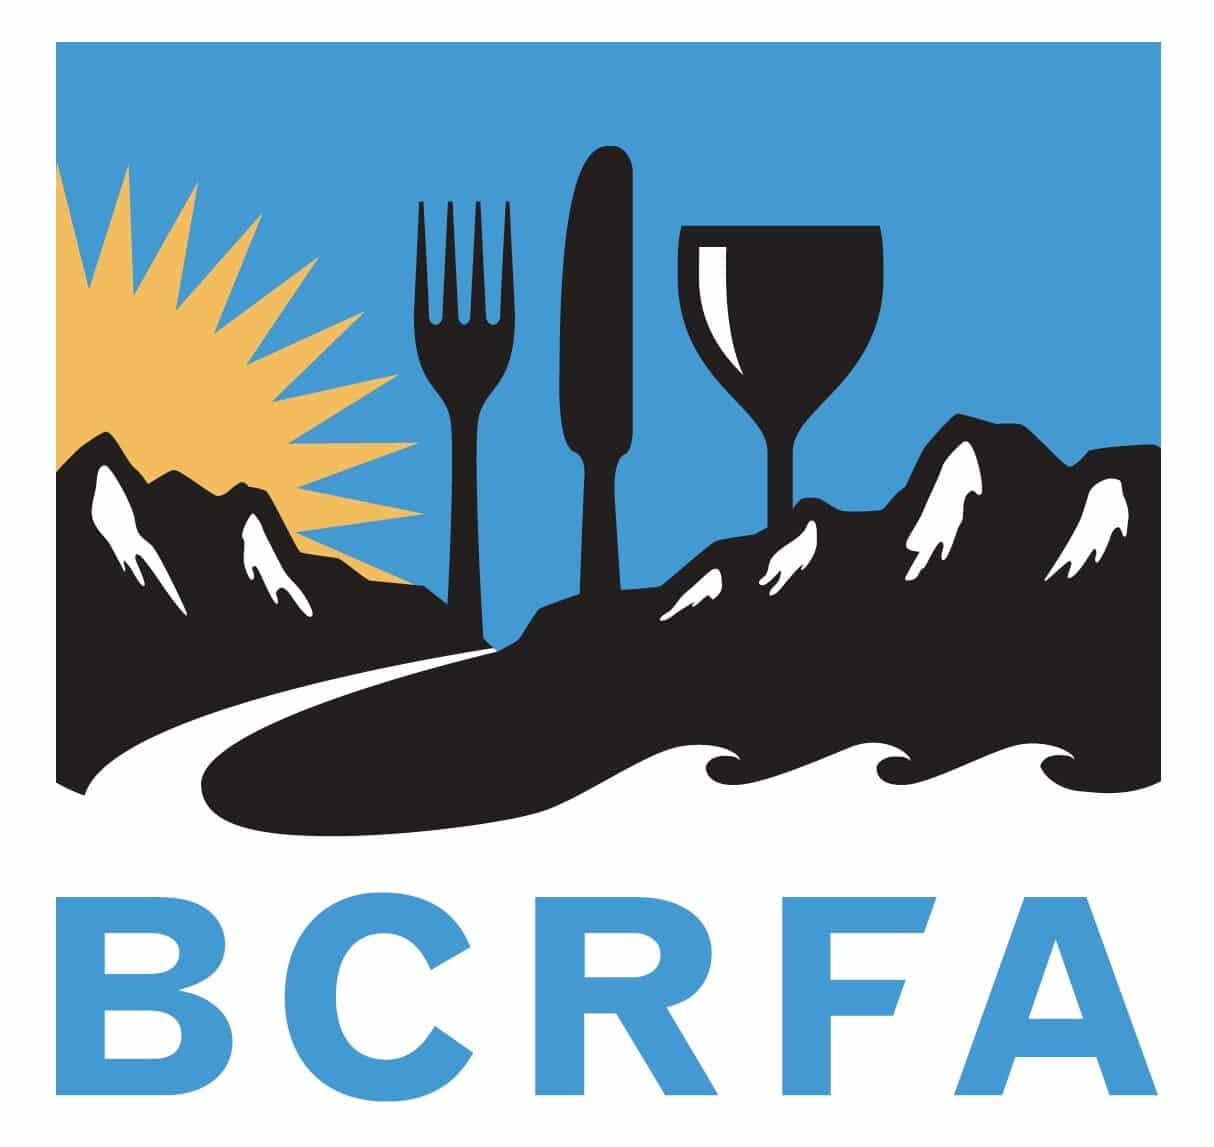 BC Restaurant and Foodservices Association logo.